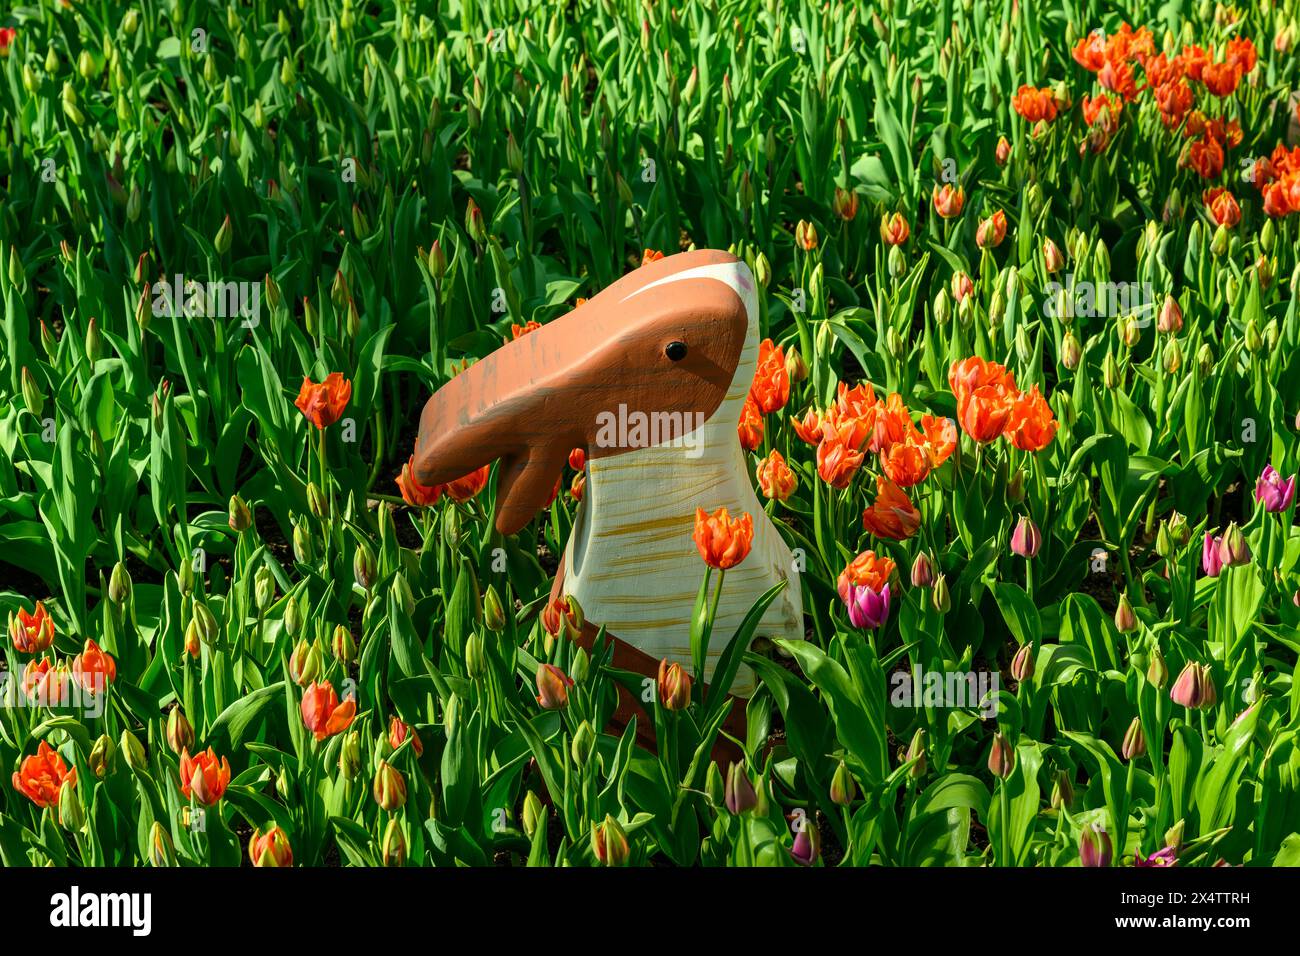 A wooden rabbit at Tulipmania 2024 @ The Flower Dome, Gardens by the Bay, Singapore Stock Photo